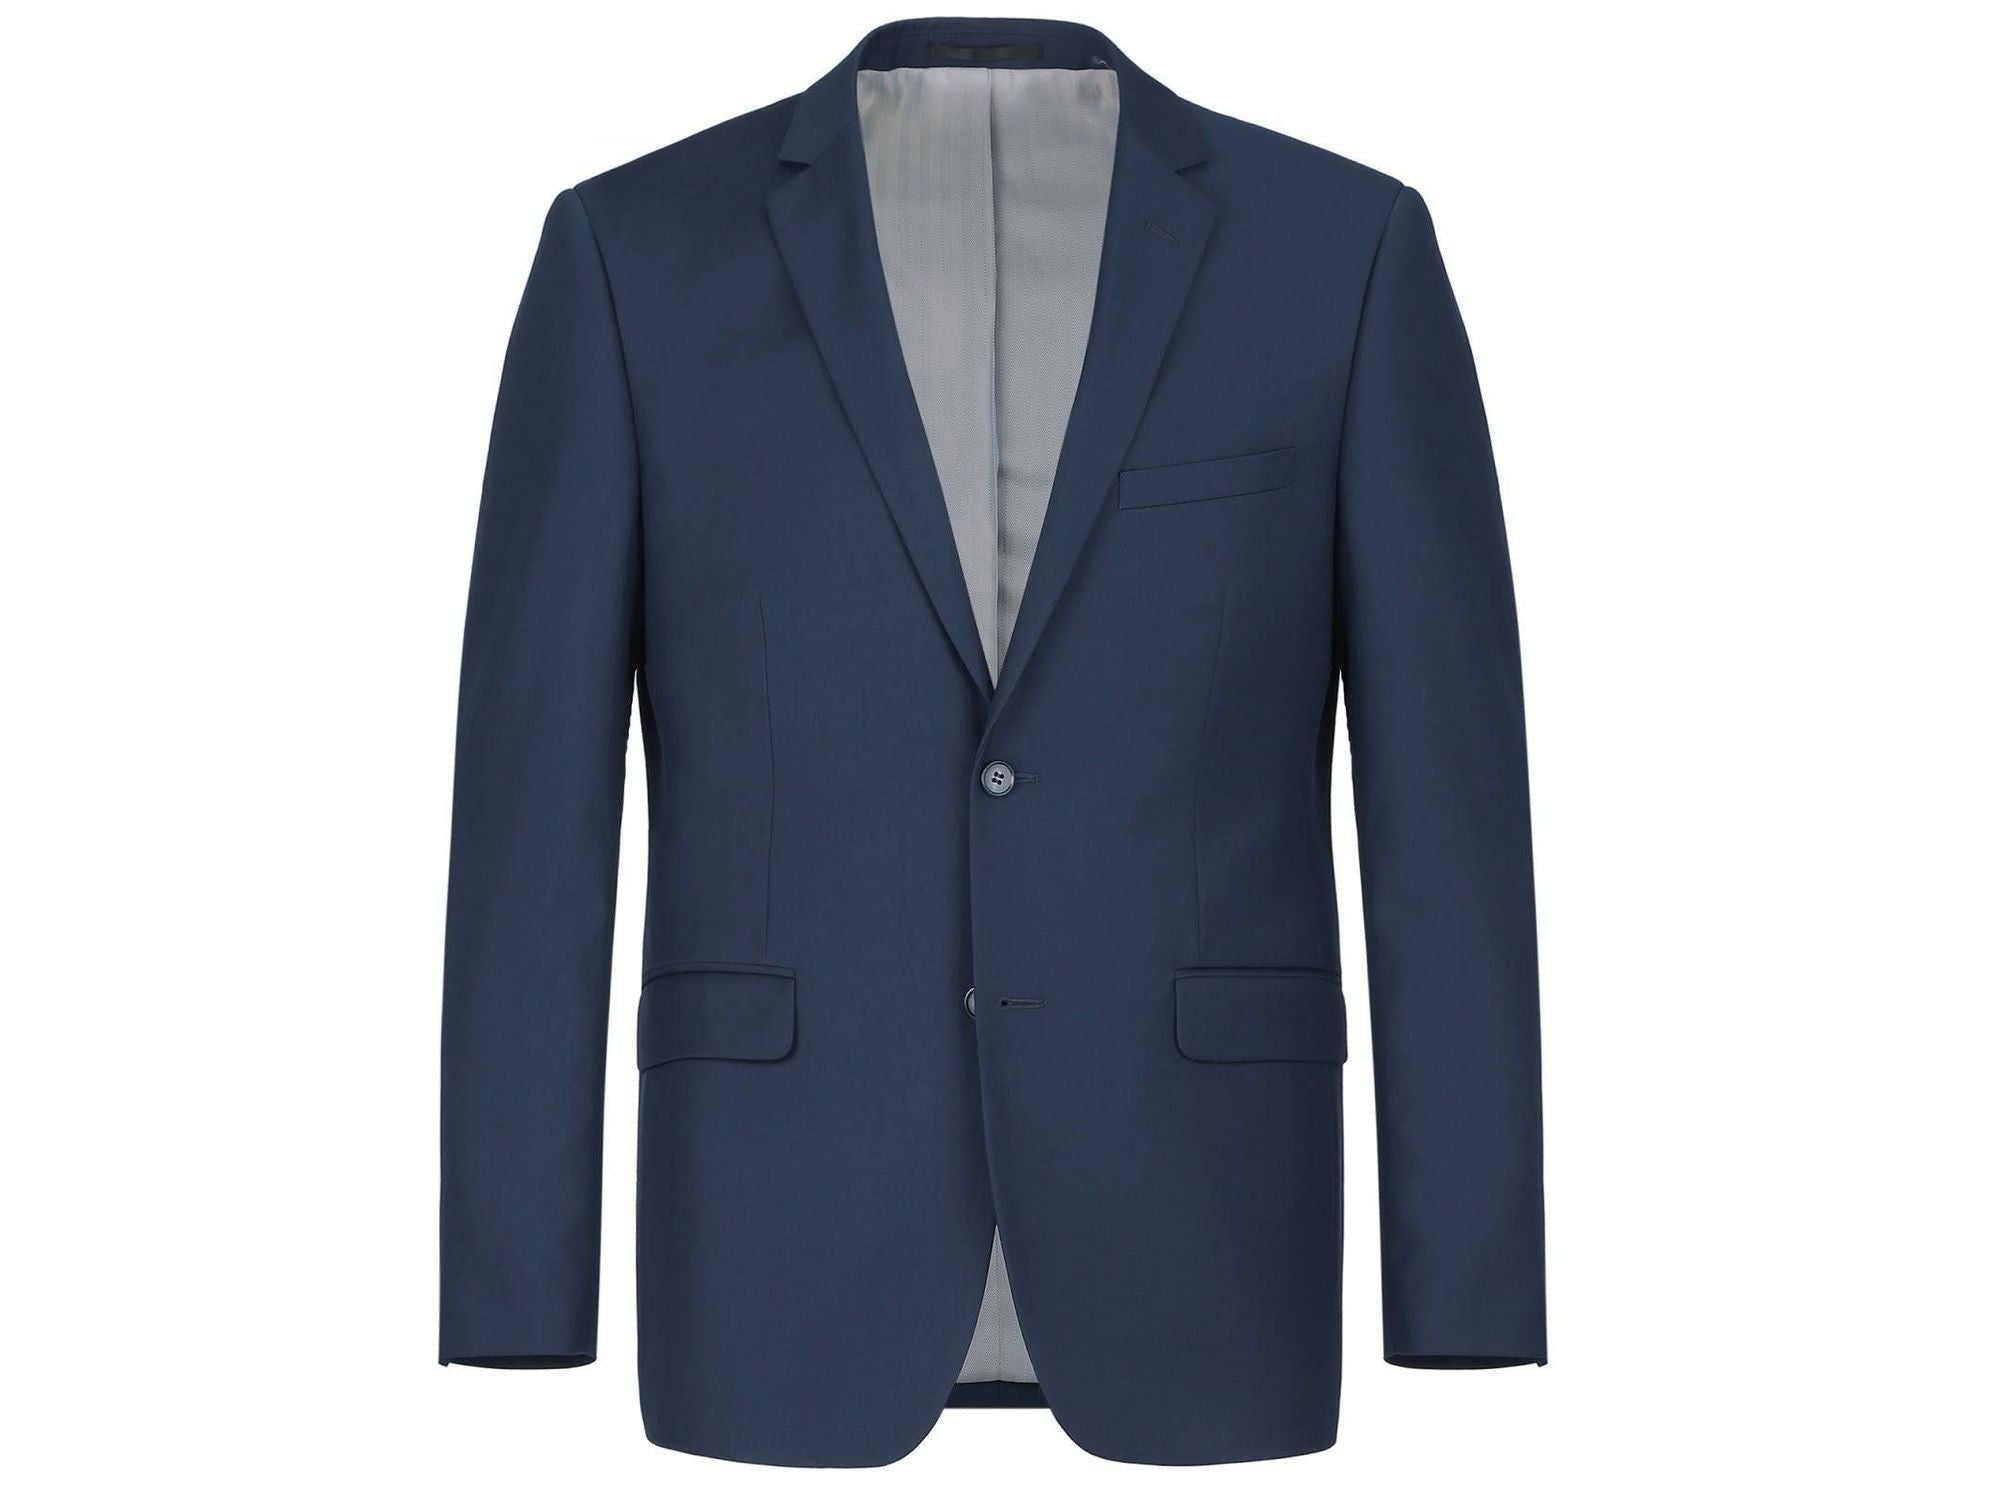 Rainwater's Fine Tropical Weight Man Made Fabric Classic Fit Suit In New Navy - Rainwater's Men's Clothing and Tuxedo Rental